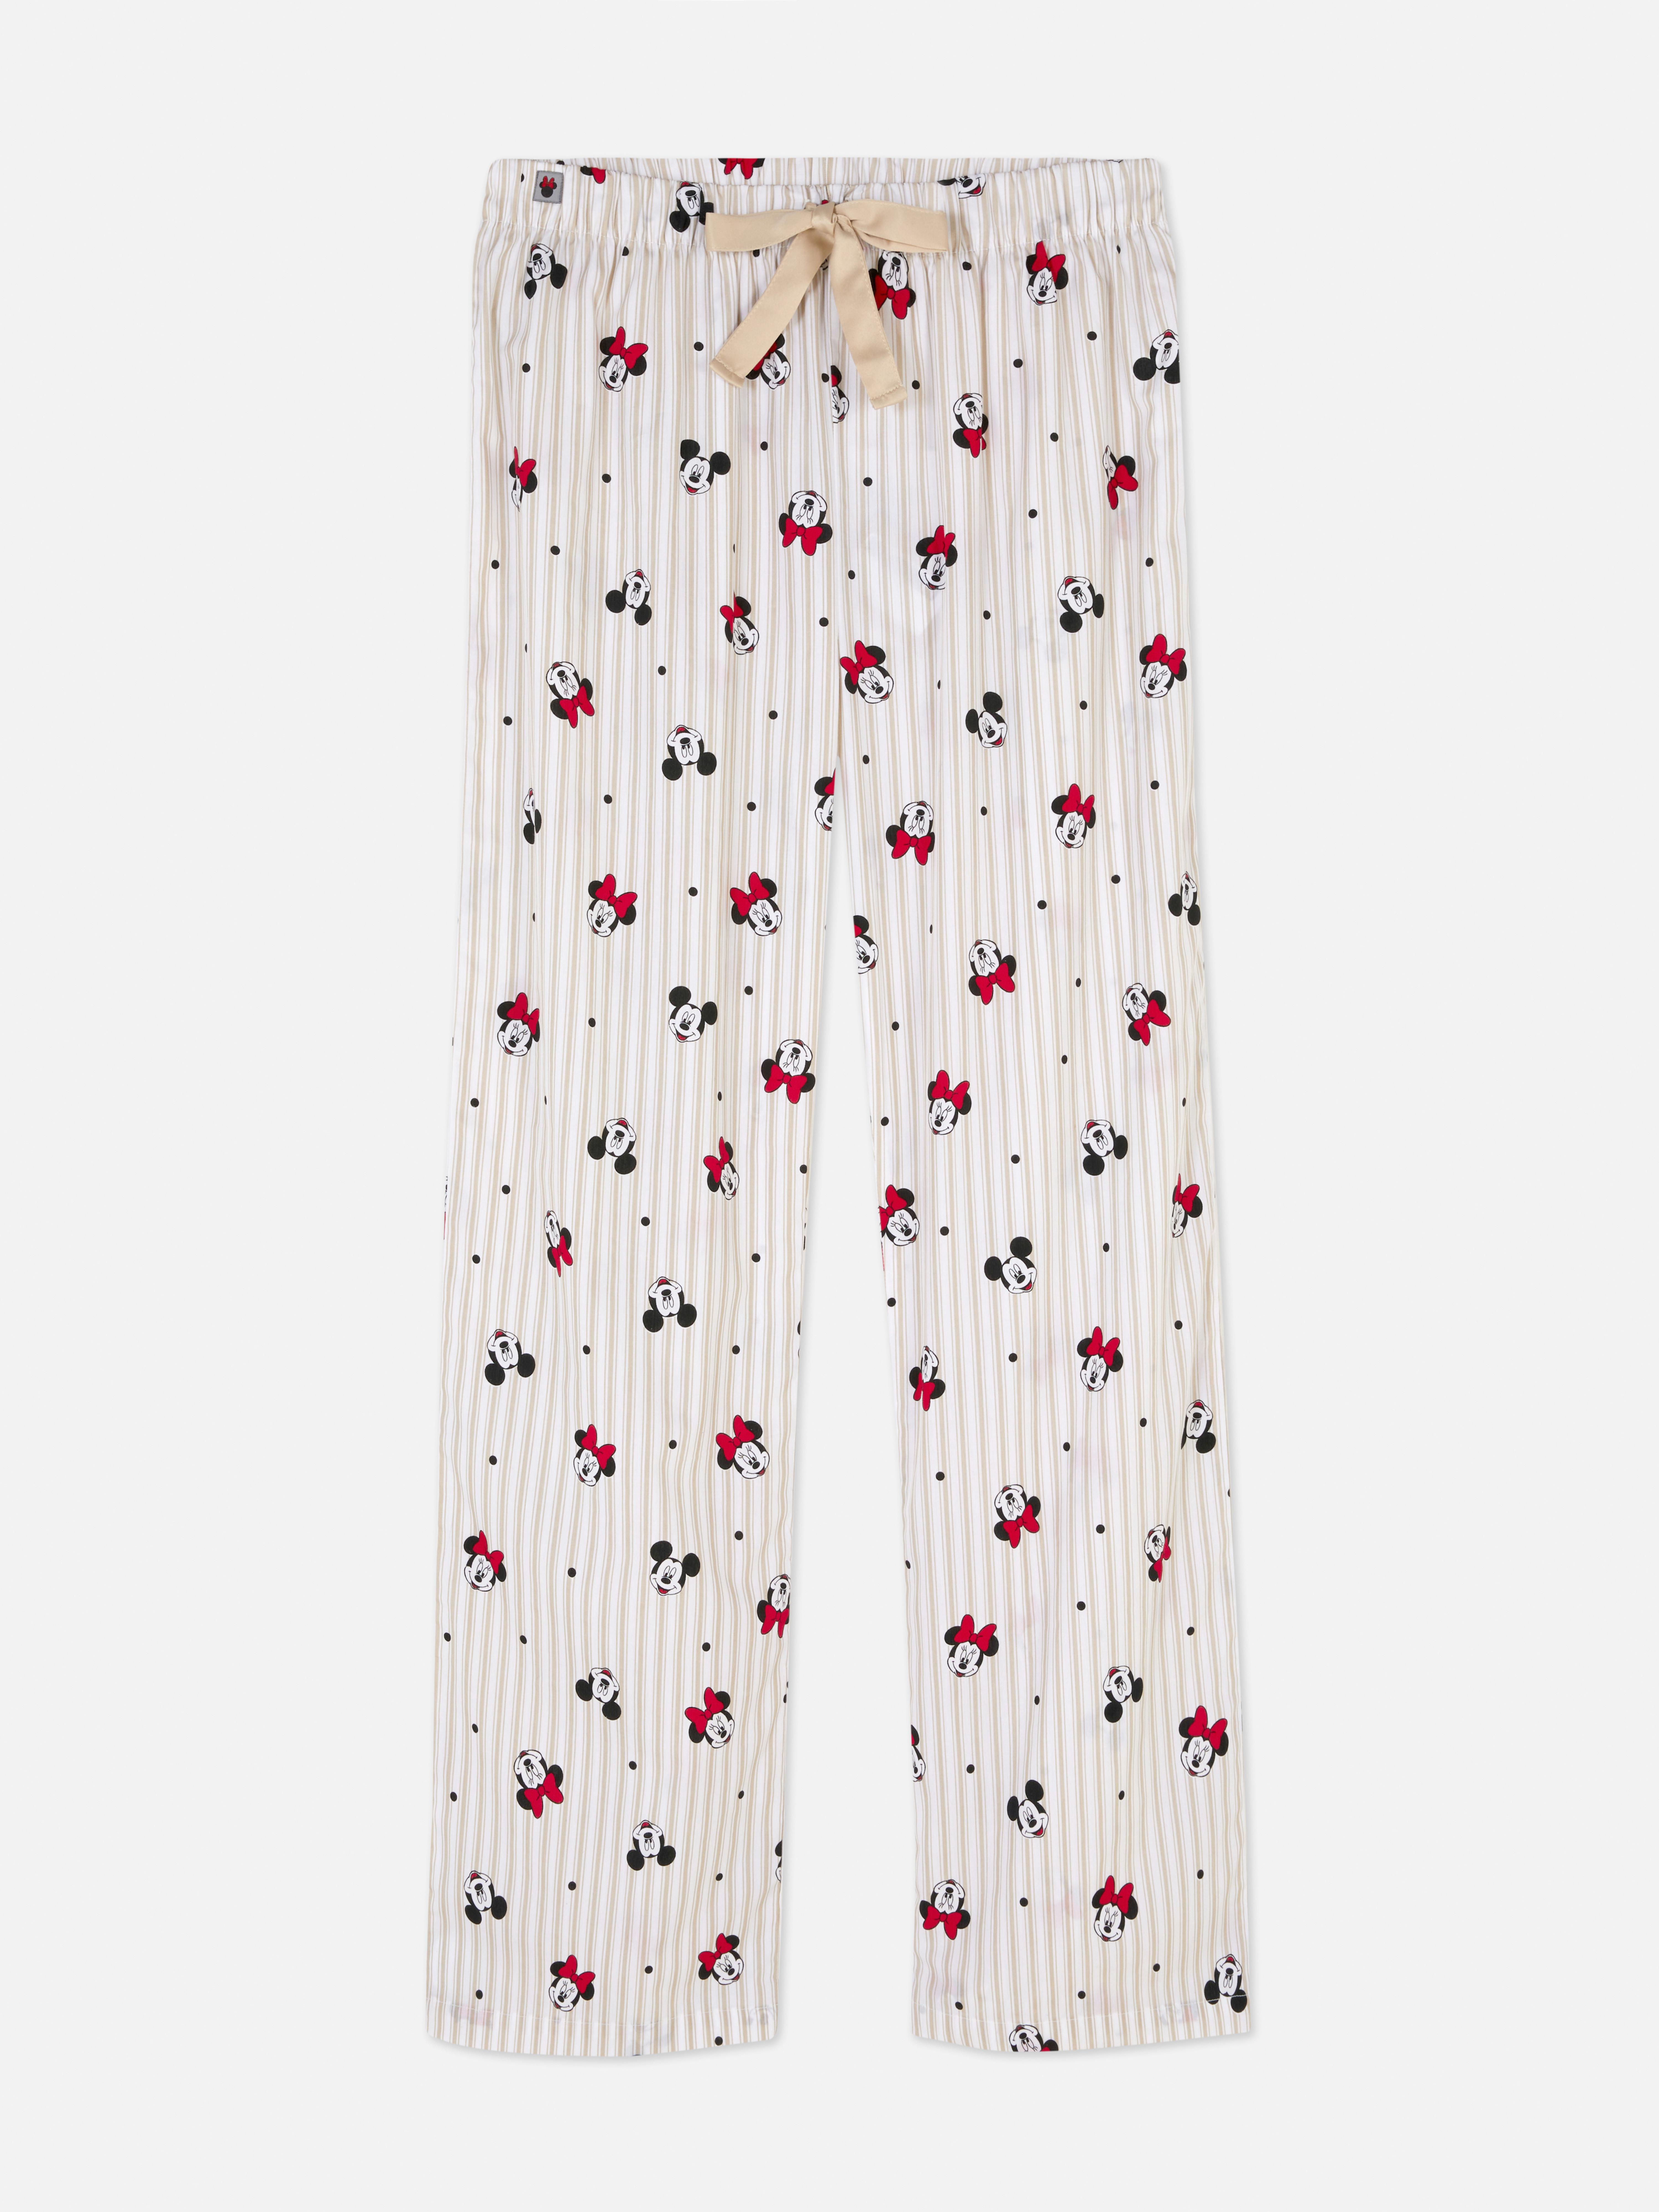 Disney’s Mickey Mouse and Minnie Mouse Pyjama Bottoms